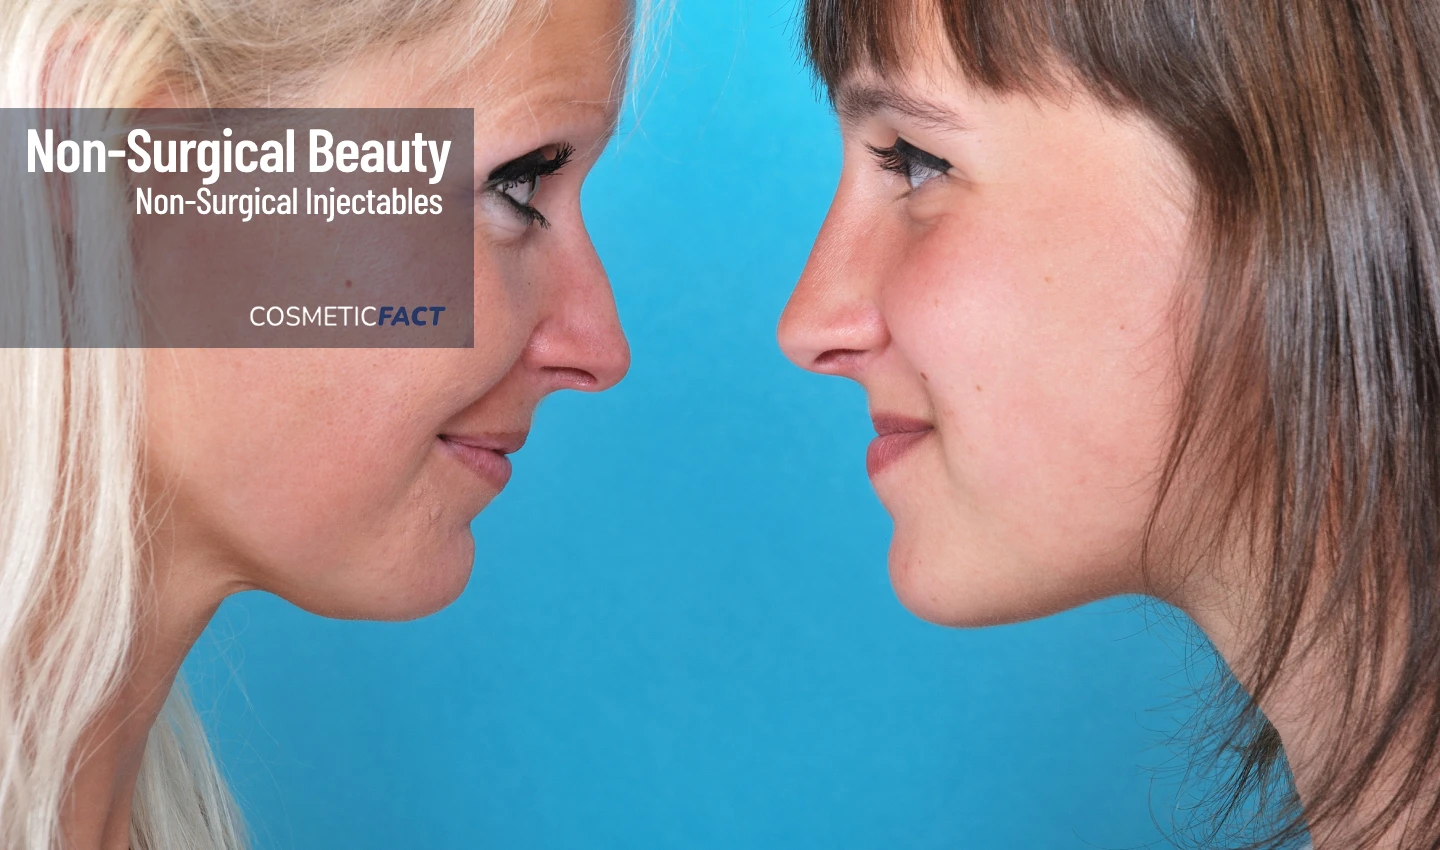 Side image of two women looking at each other, highlighting the difference in their facial profile. One woman has a double chin, while the other does not. The image represents the comparison between Kybella and traditional surgery for double chin reduction